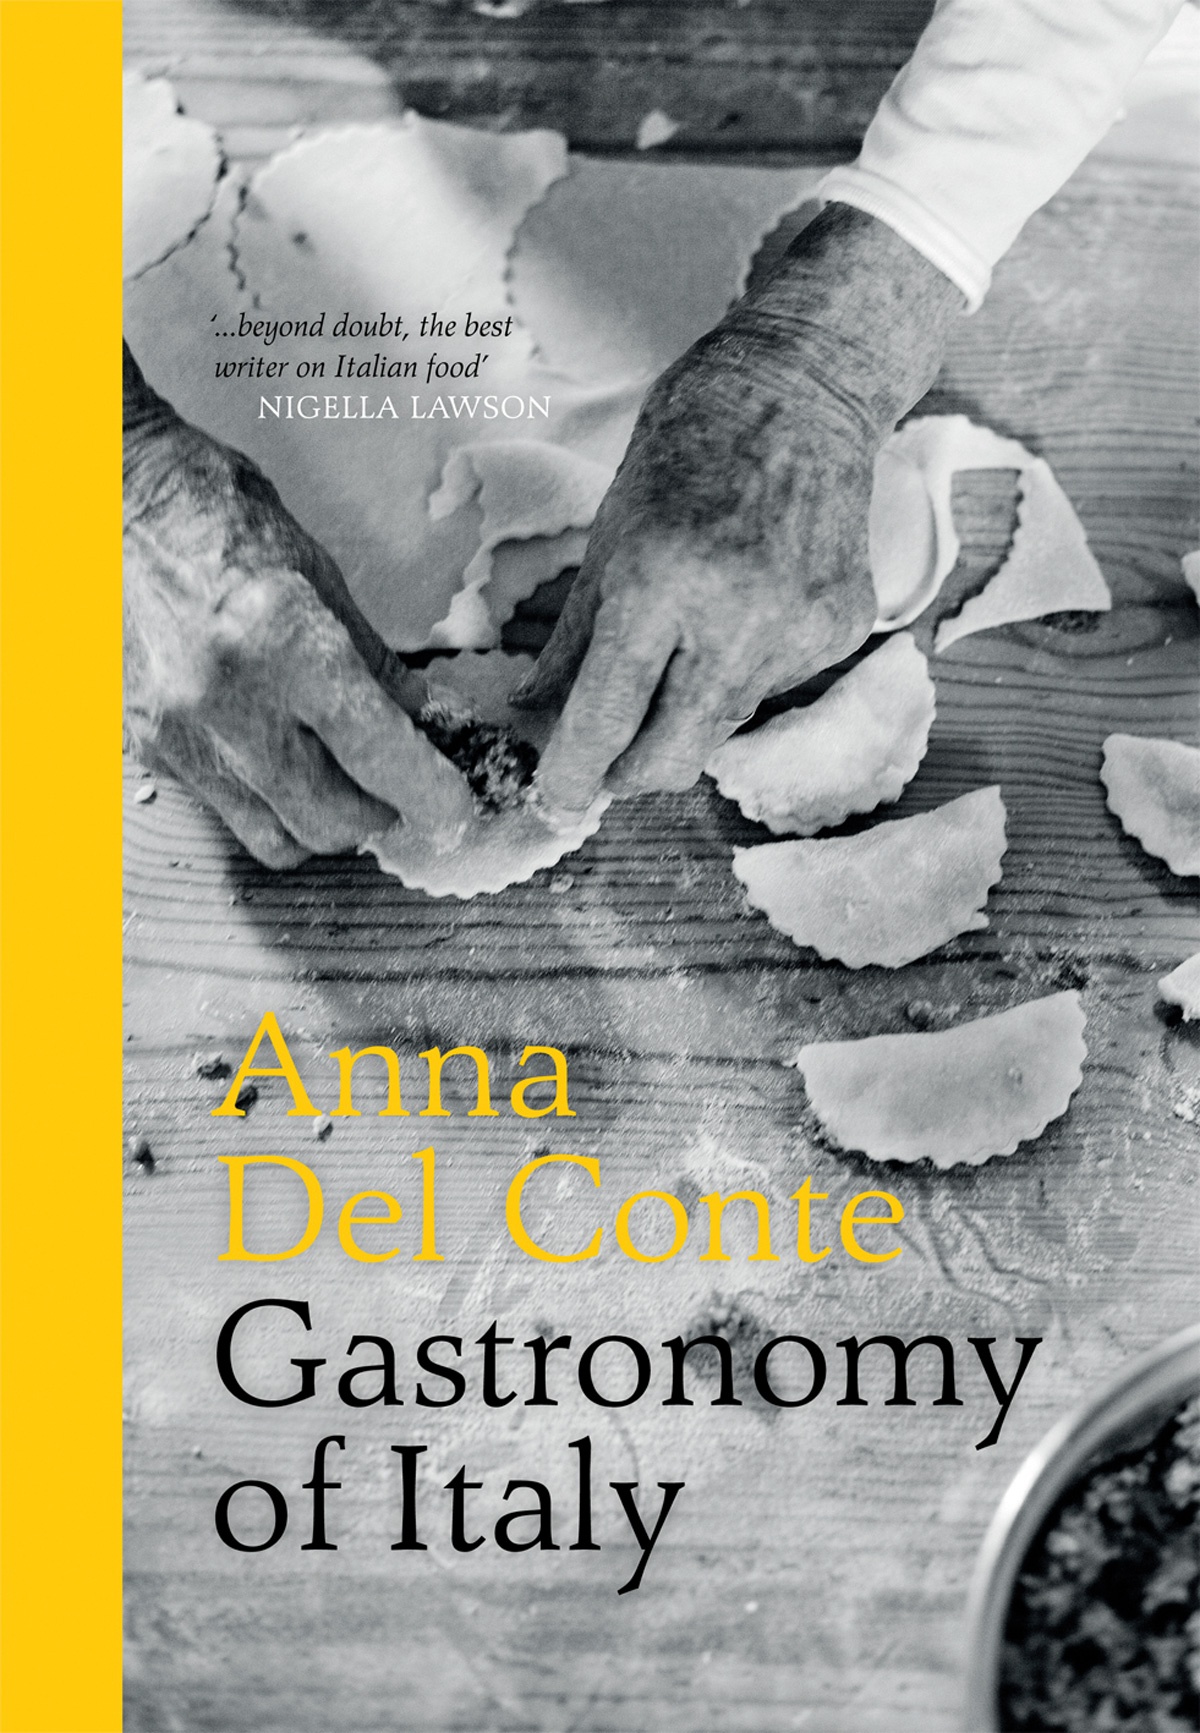 Book cover of Gastronomy Of Italy by Anna del Conte